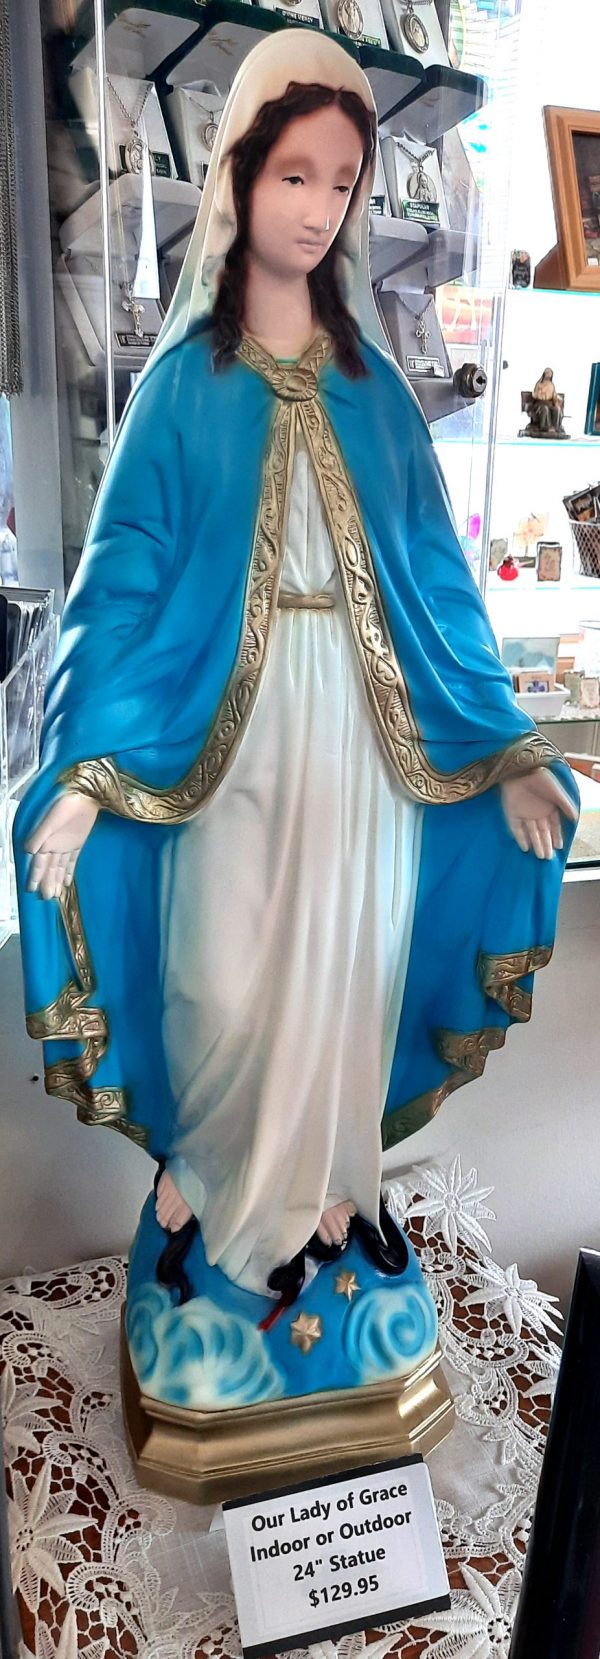 Our Lady of Grace Indoor Outdoor Statue